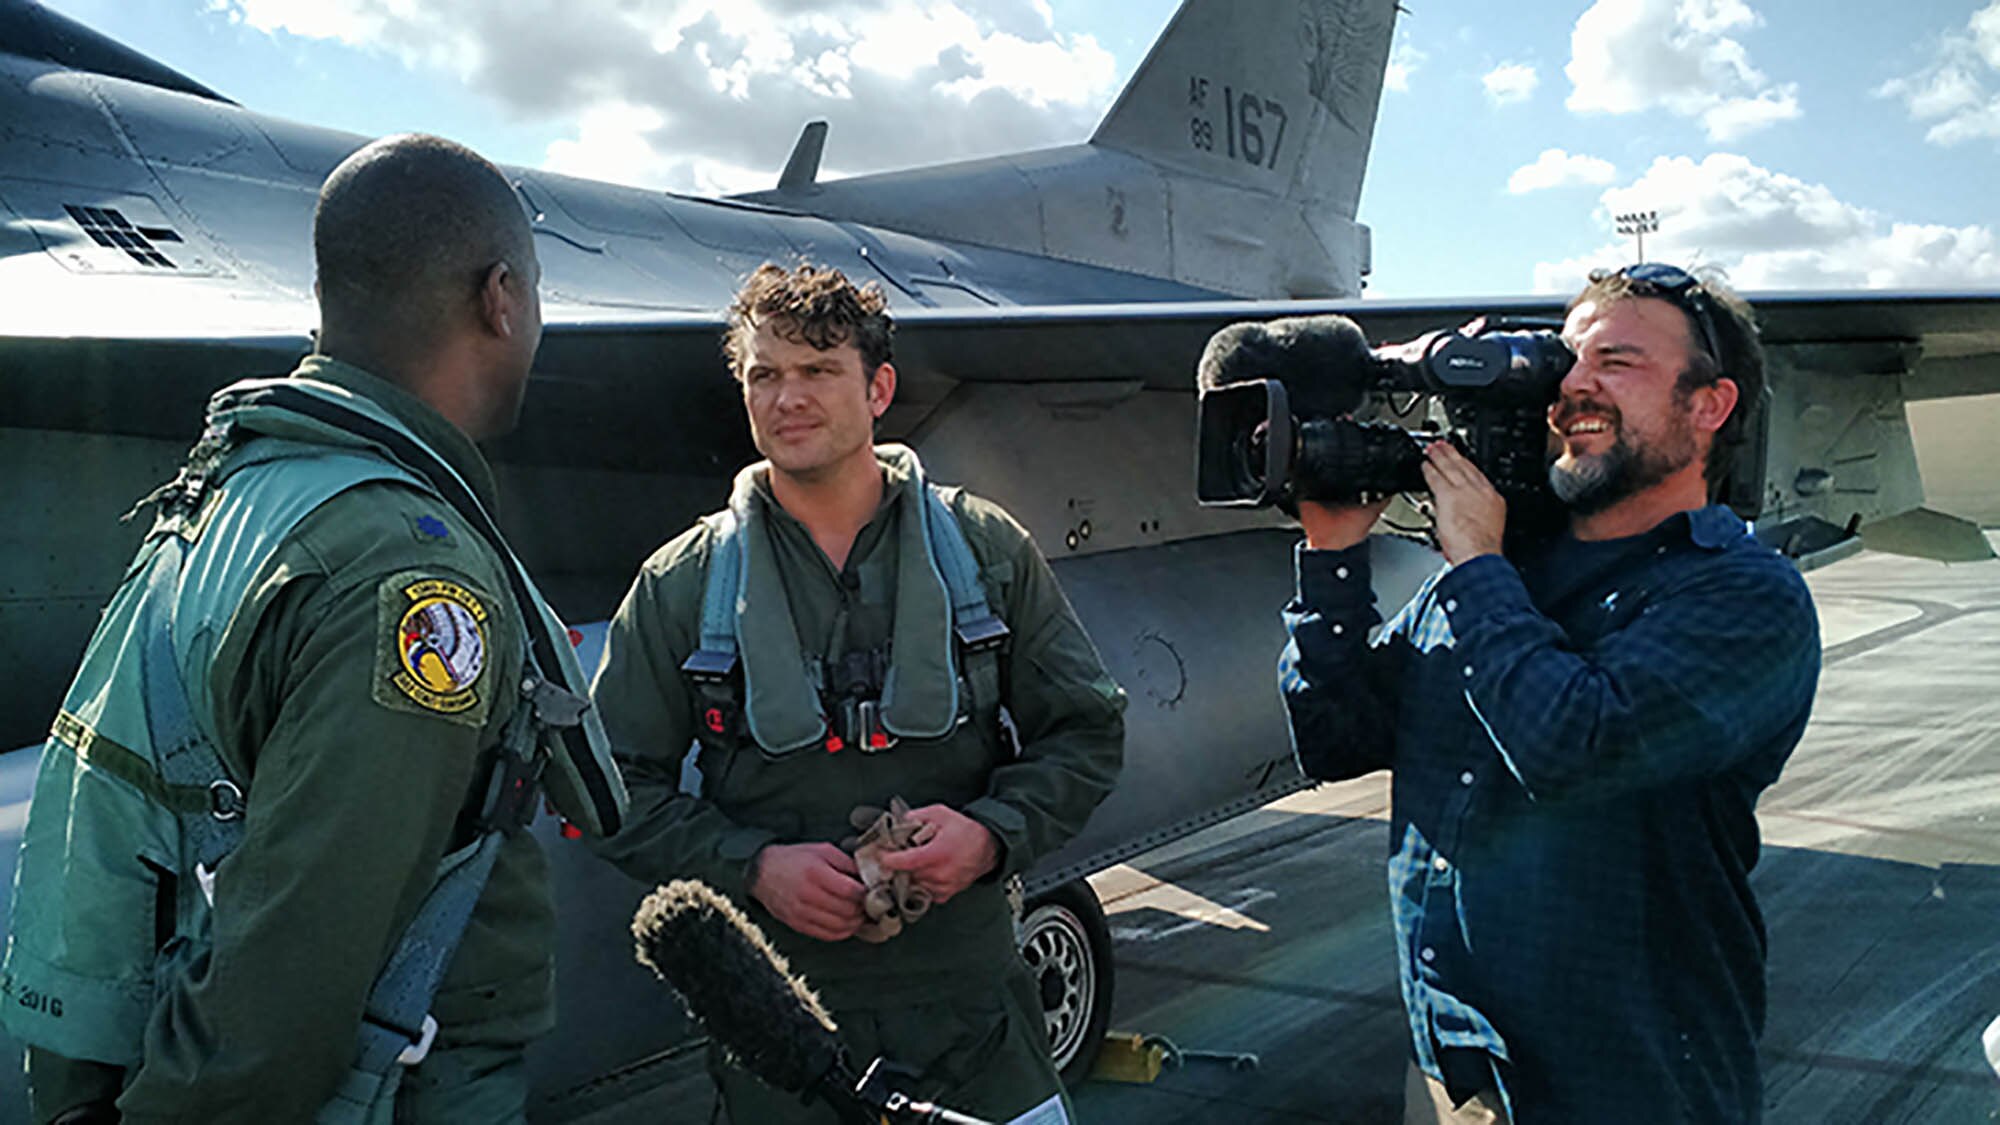 Lt. Col. Ernie Mayfield, Director of Operations, 138th Fighter Wing, Det. 1, talks with Peter Hegseth, Fox & Friends television news, following his aerospace defense familiarization flight Feb. 1. at Ellington Field Joint Reserve Base, Houston Texas. Hegseth flew with the unit as part of a Continental Aersospace Defense Region communications outreach plan to help enhance public knowledge about temporary flight restrictions during high-profile events such as Super Bowl LI. (Photo released by Mary McHale)